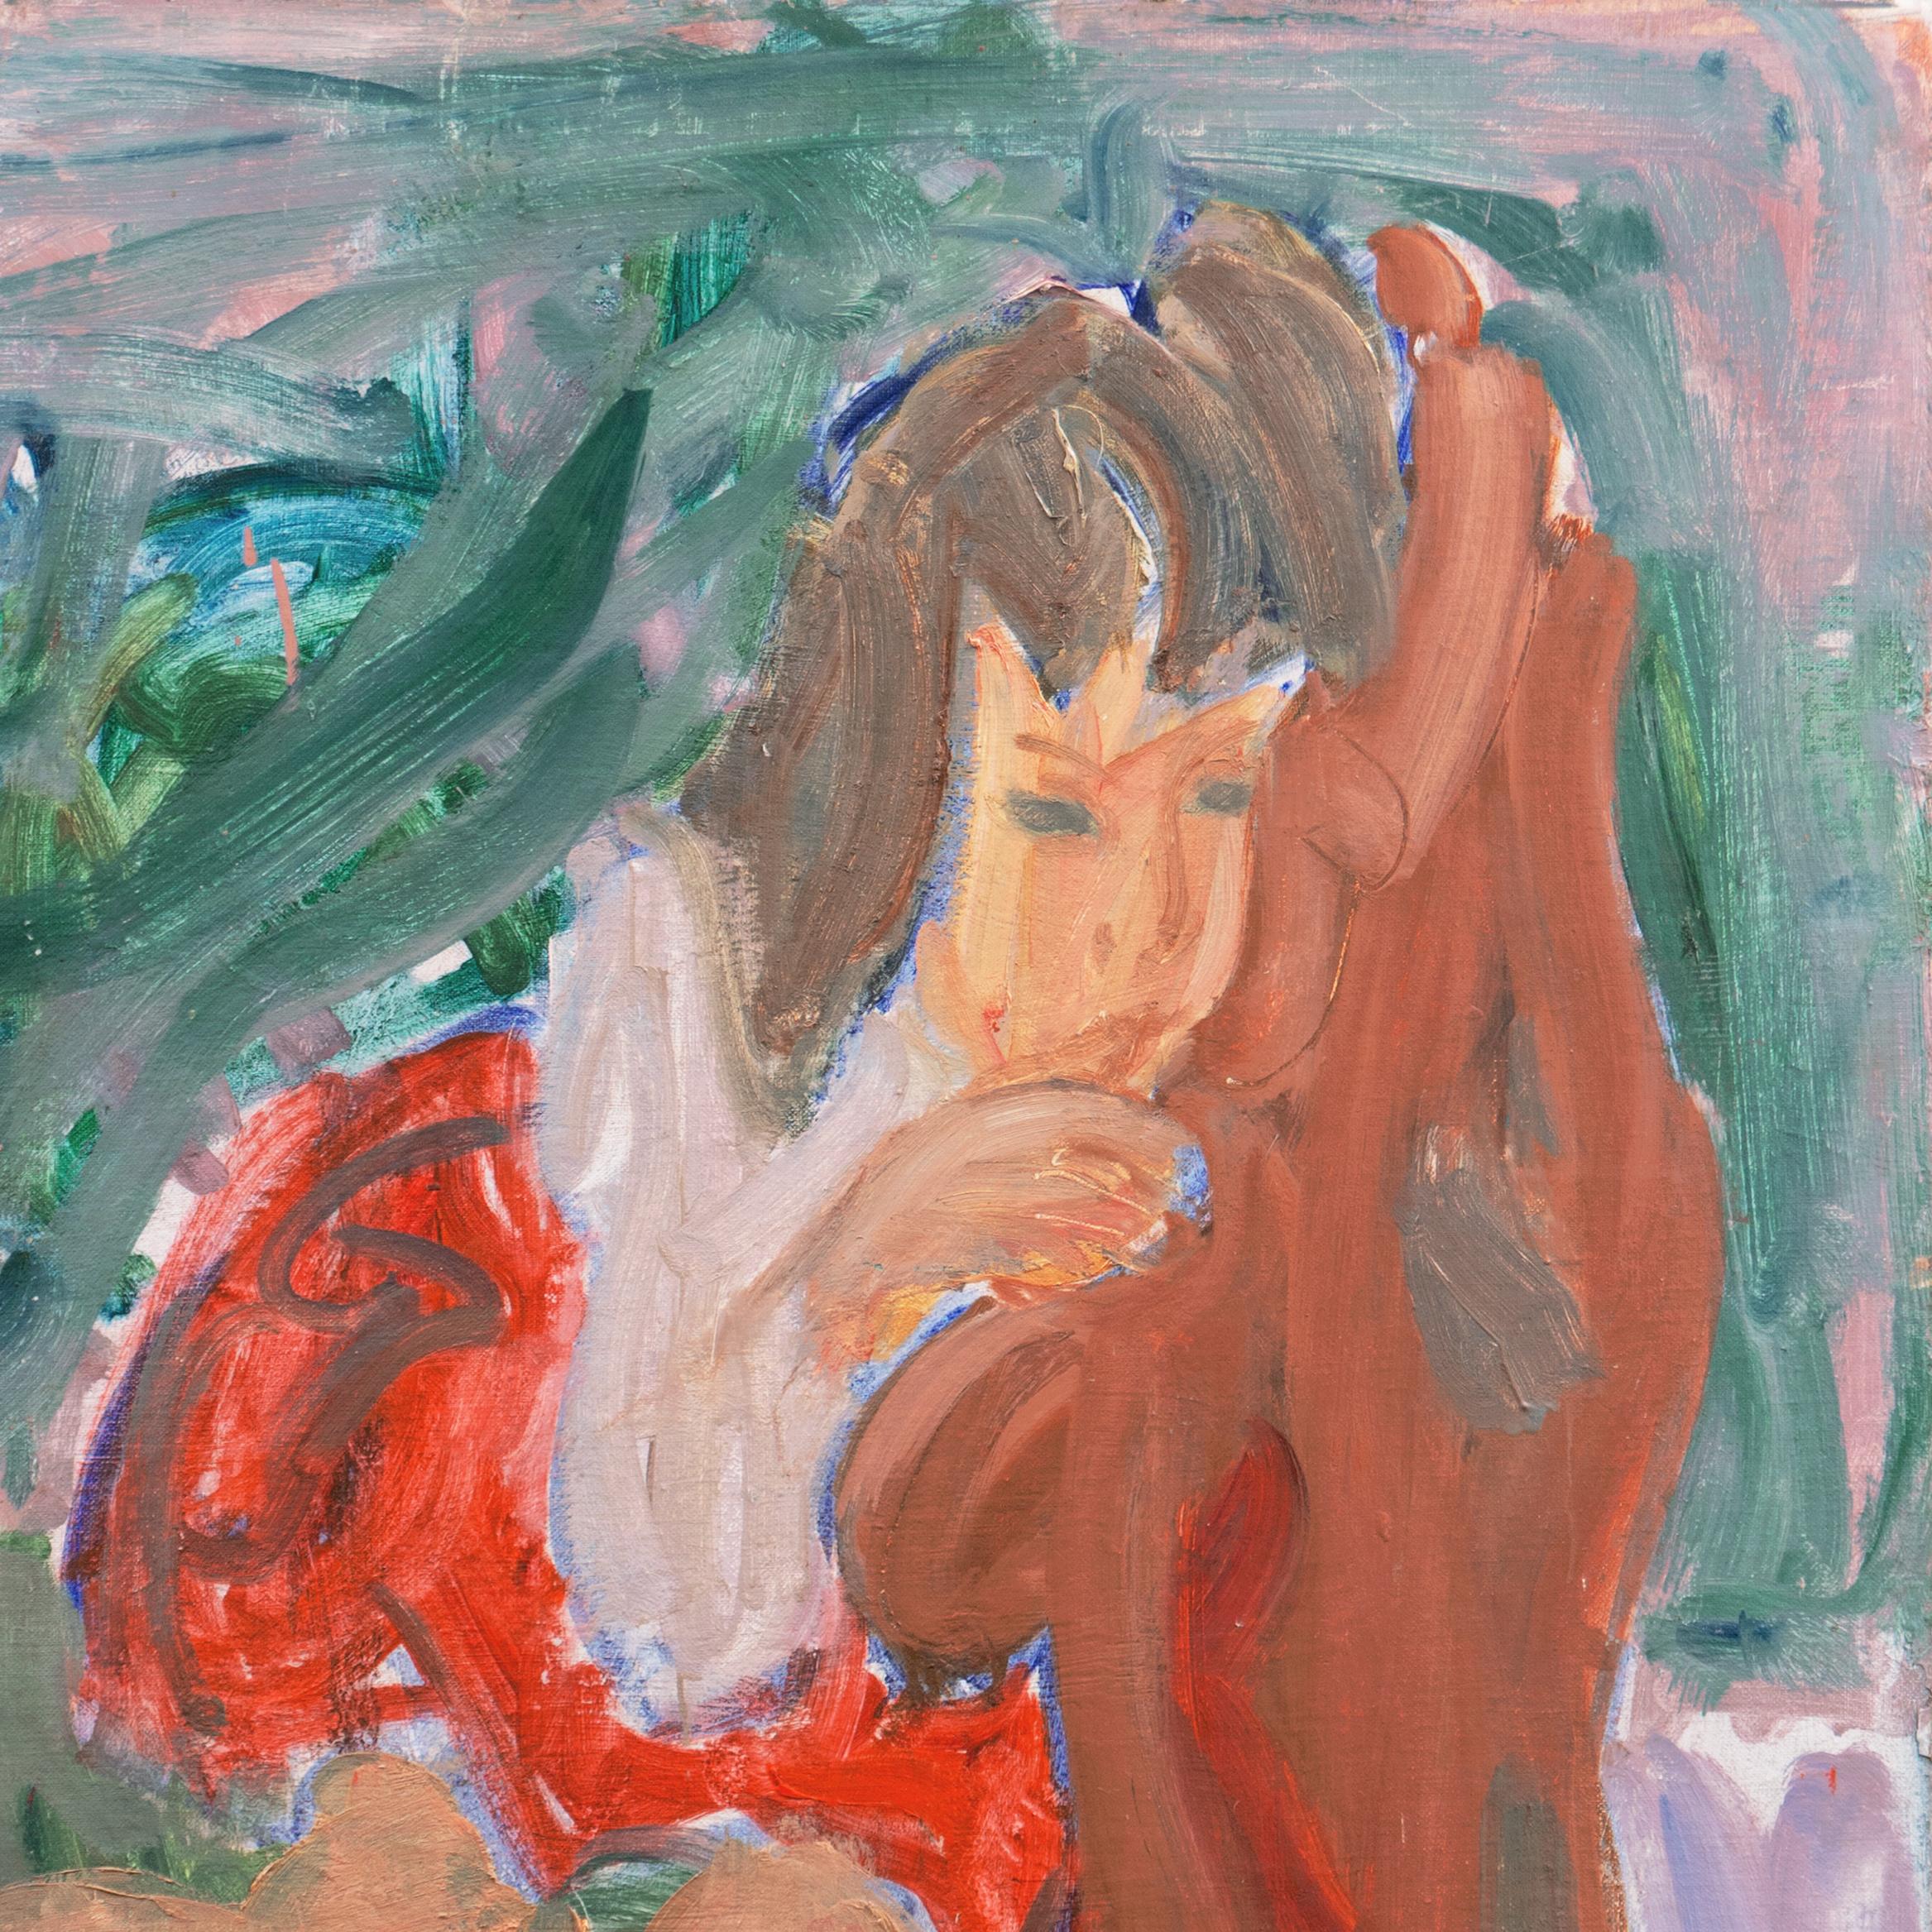 Signed lower right, 'Di Gesu' for Victor Di Gesu (American, 1914-1988) and dated 1971; additionally signed, verso, and titled, 'Leslie'.

Winner of the Prix Othon Friesz, Victor di Gesu first attended the Chouinard Art School before moving to Paris